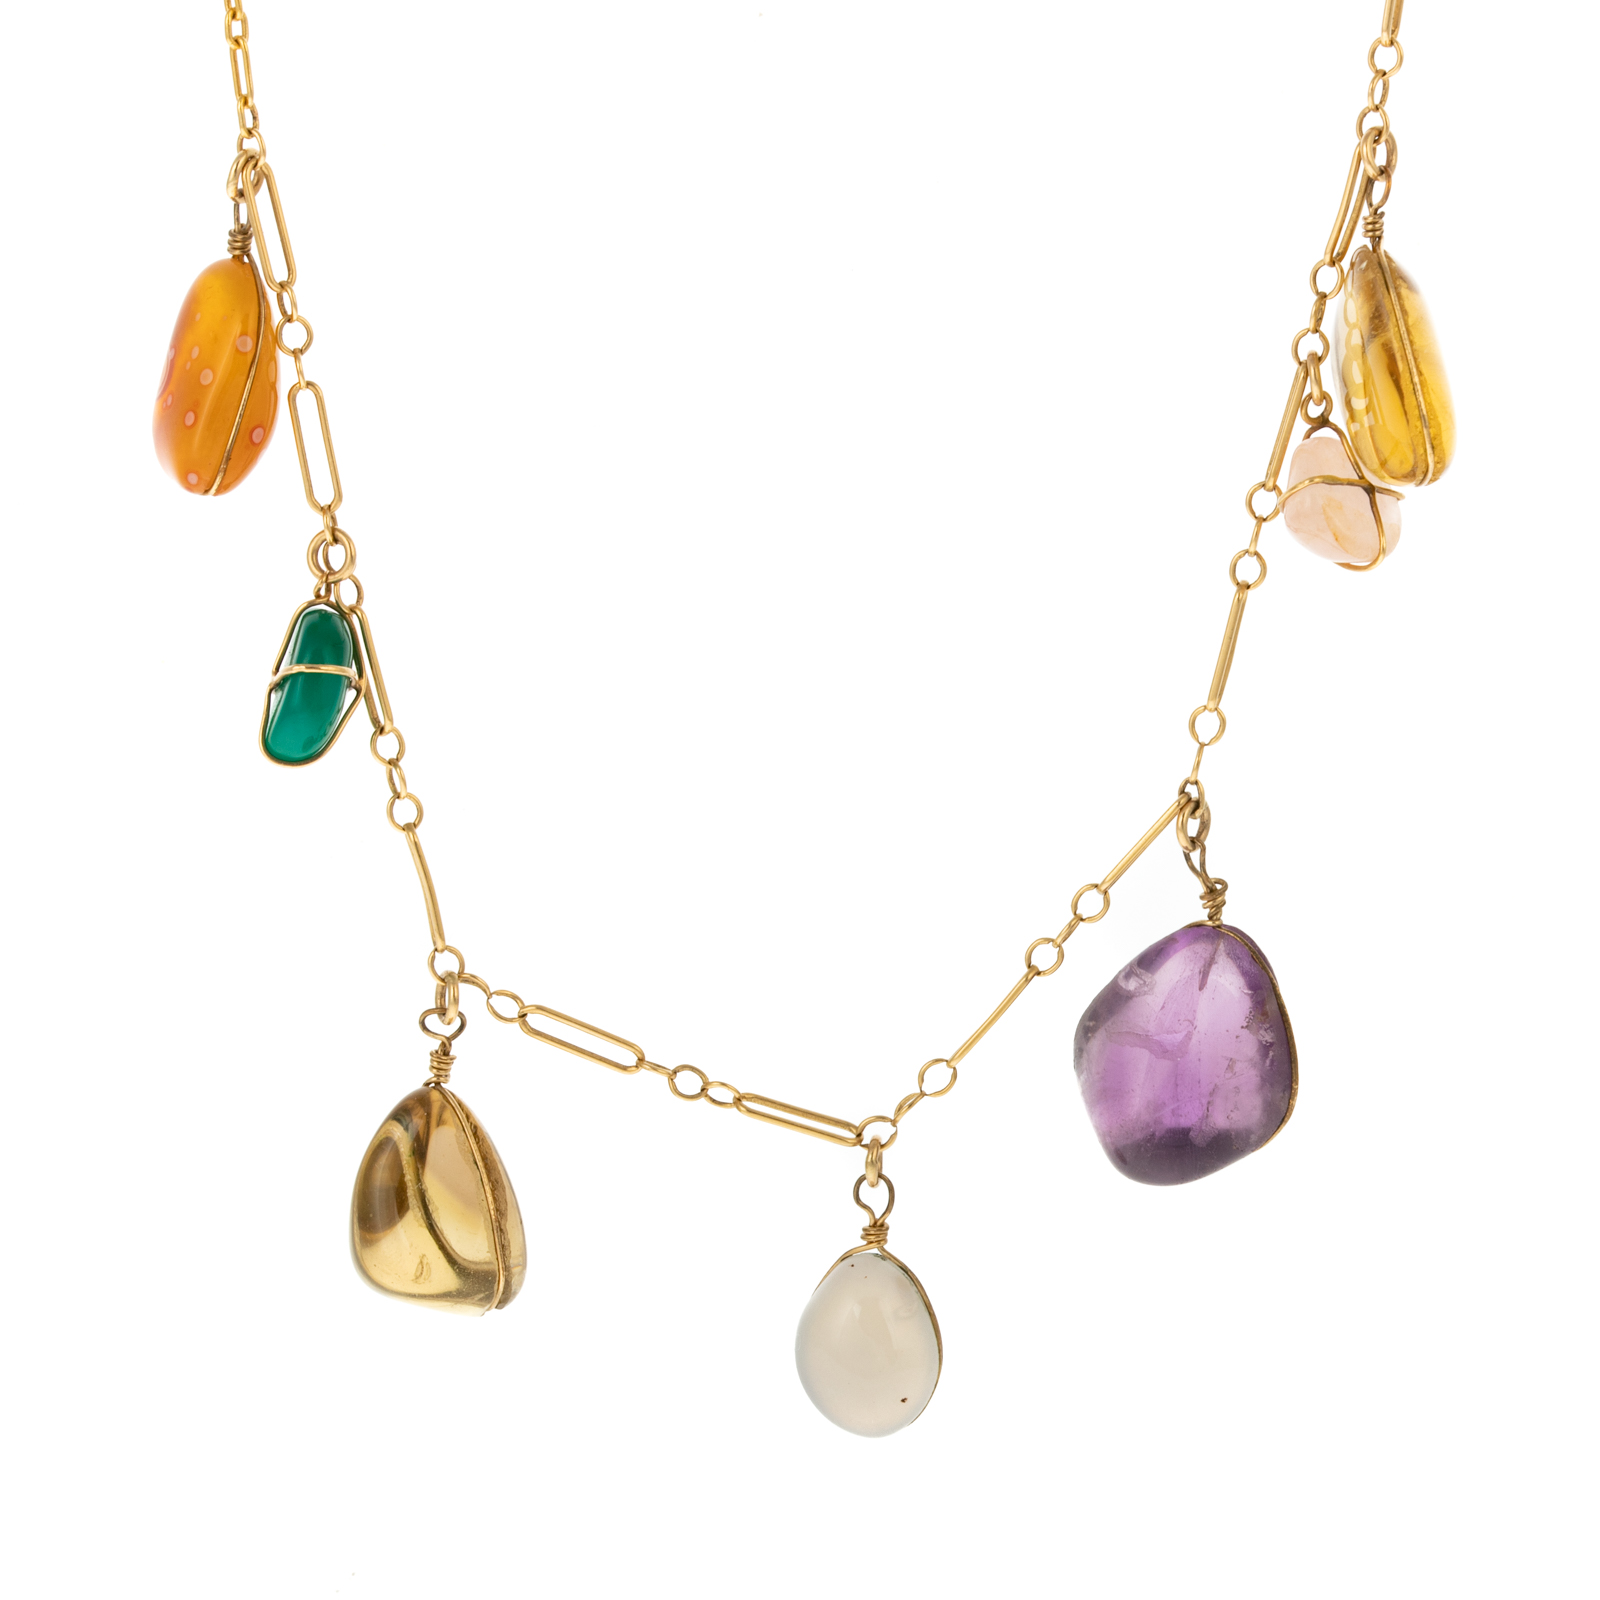 AN OVAL LINK NECKLACE WITH GEMSTONE